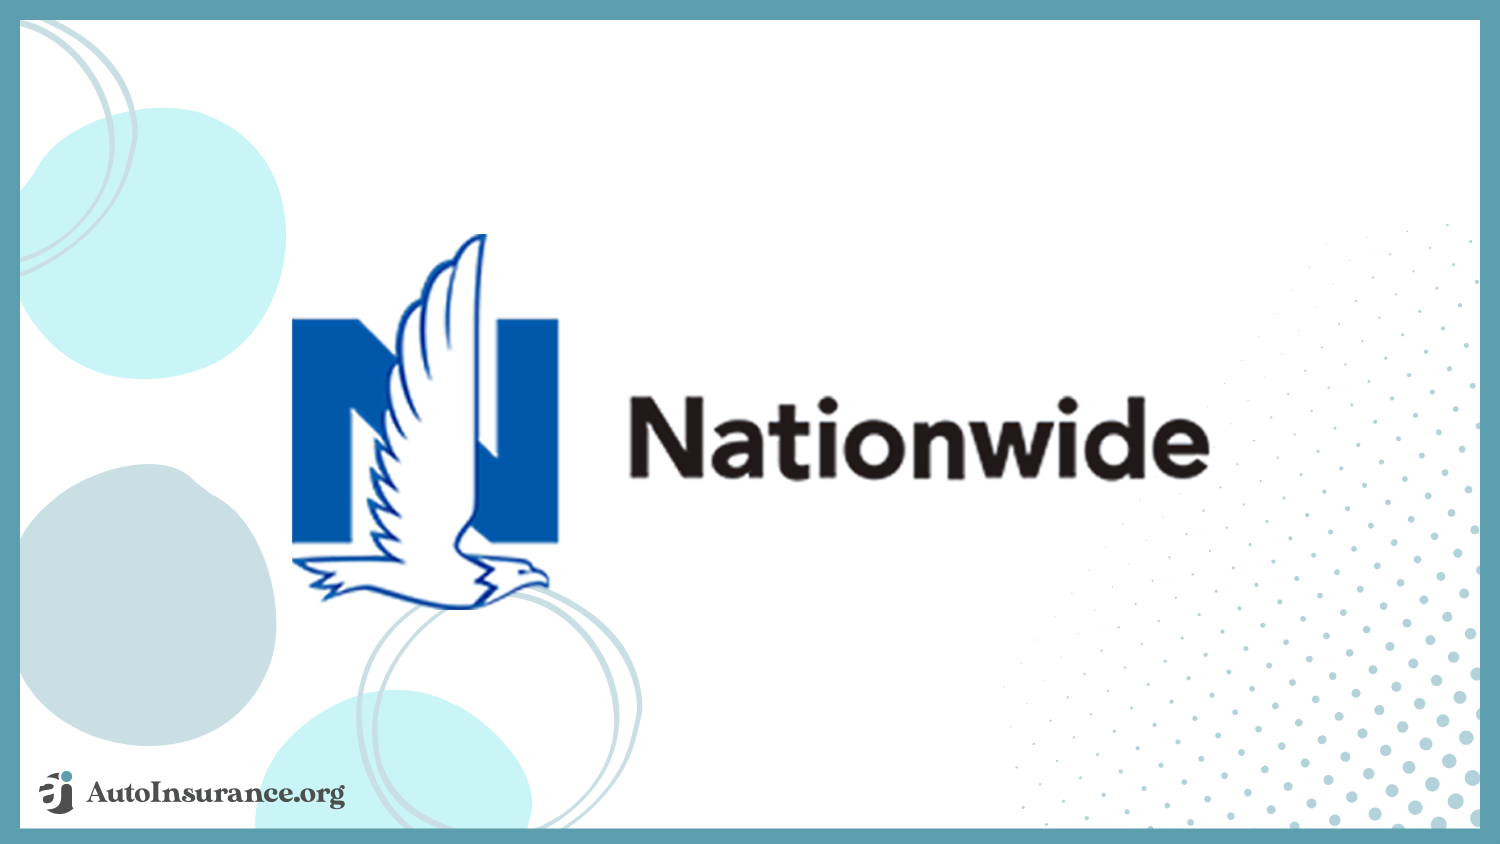 Nationwide: Best Auto Insurance for Undocumented Immigrants